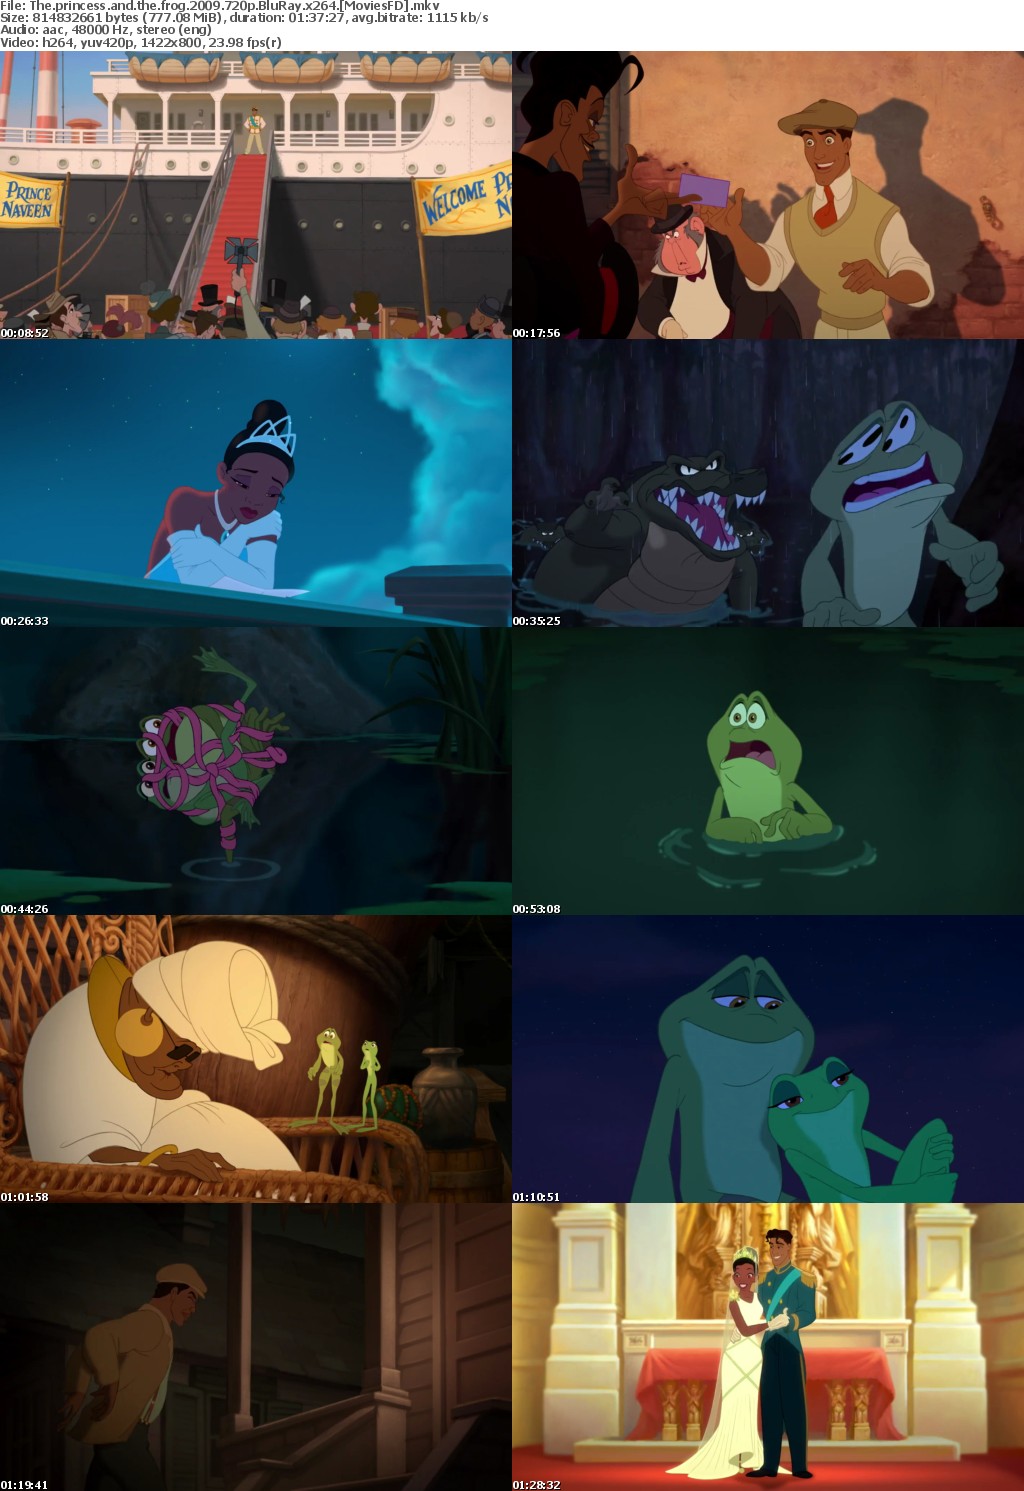 The Princess And The Frog (2009) 720p BluRay x264 - MoviesFD